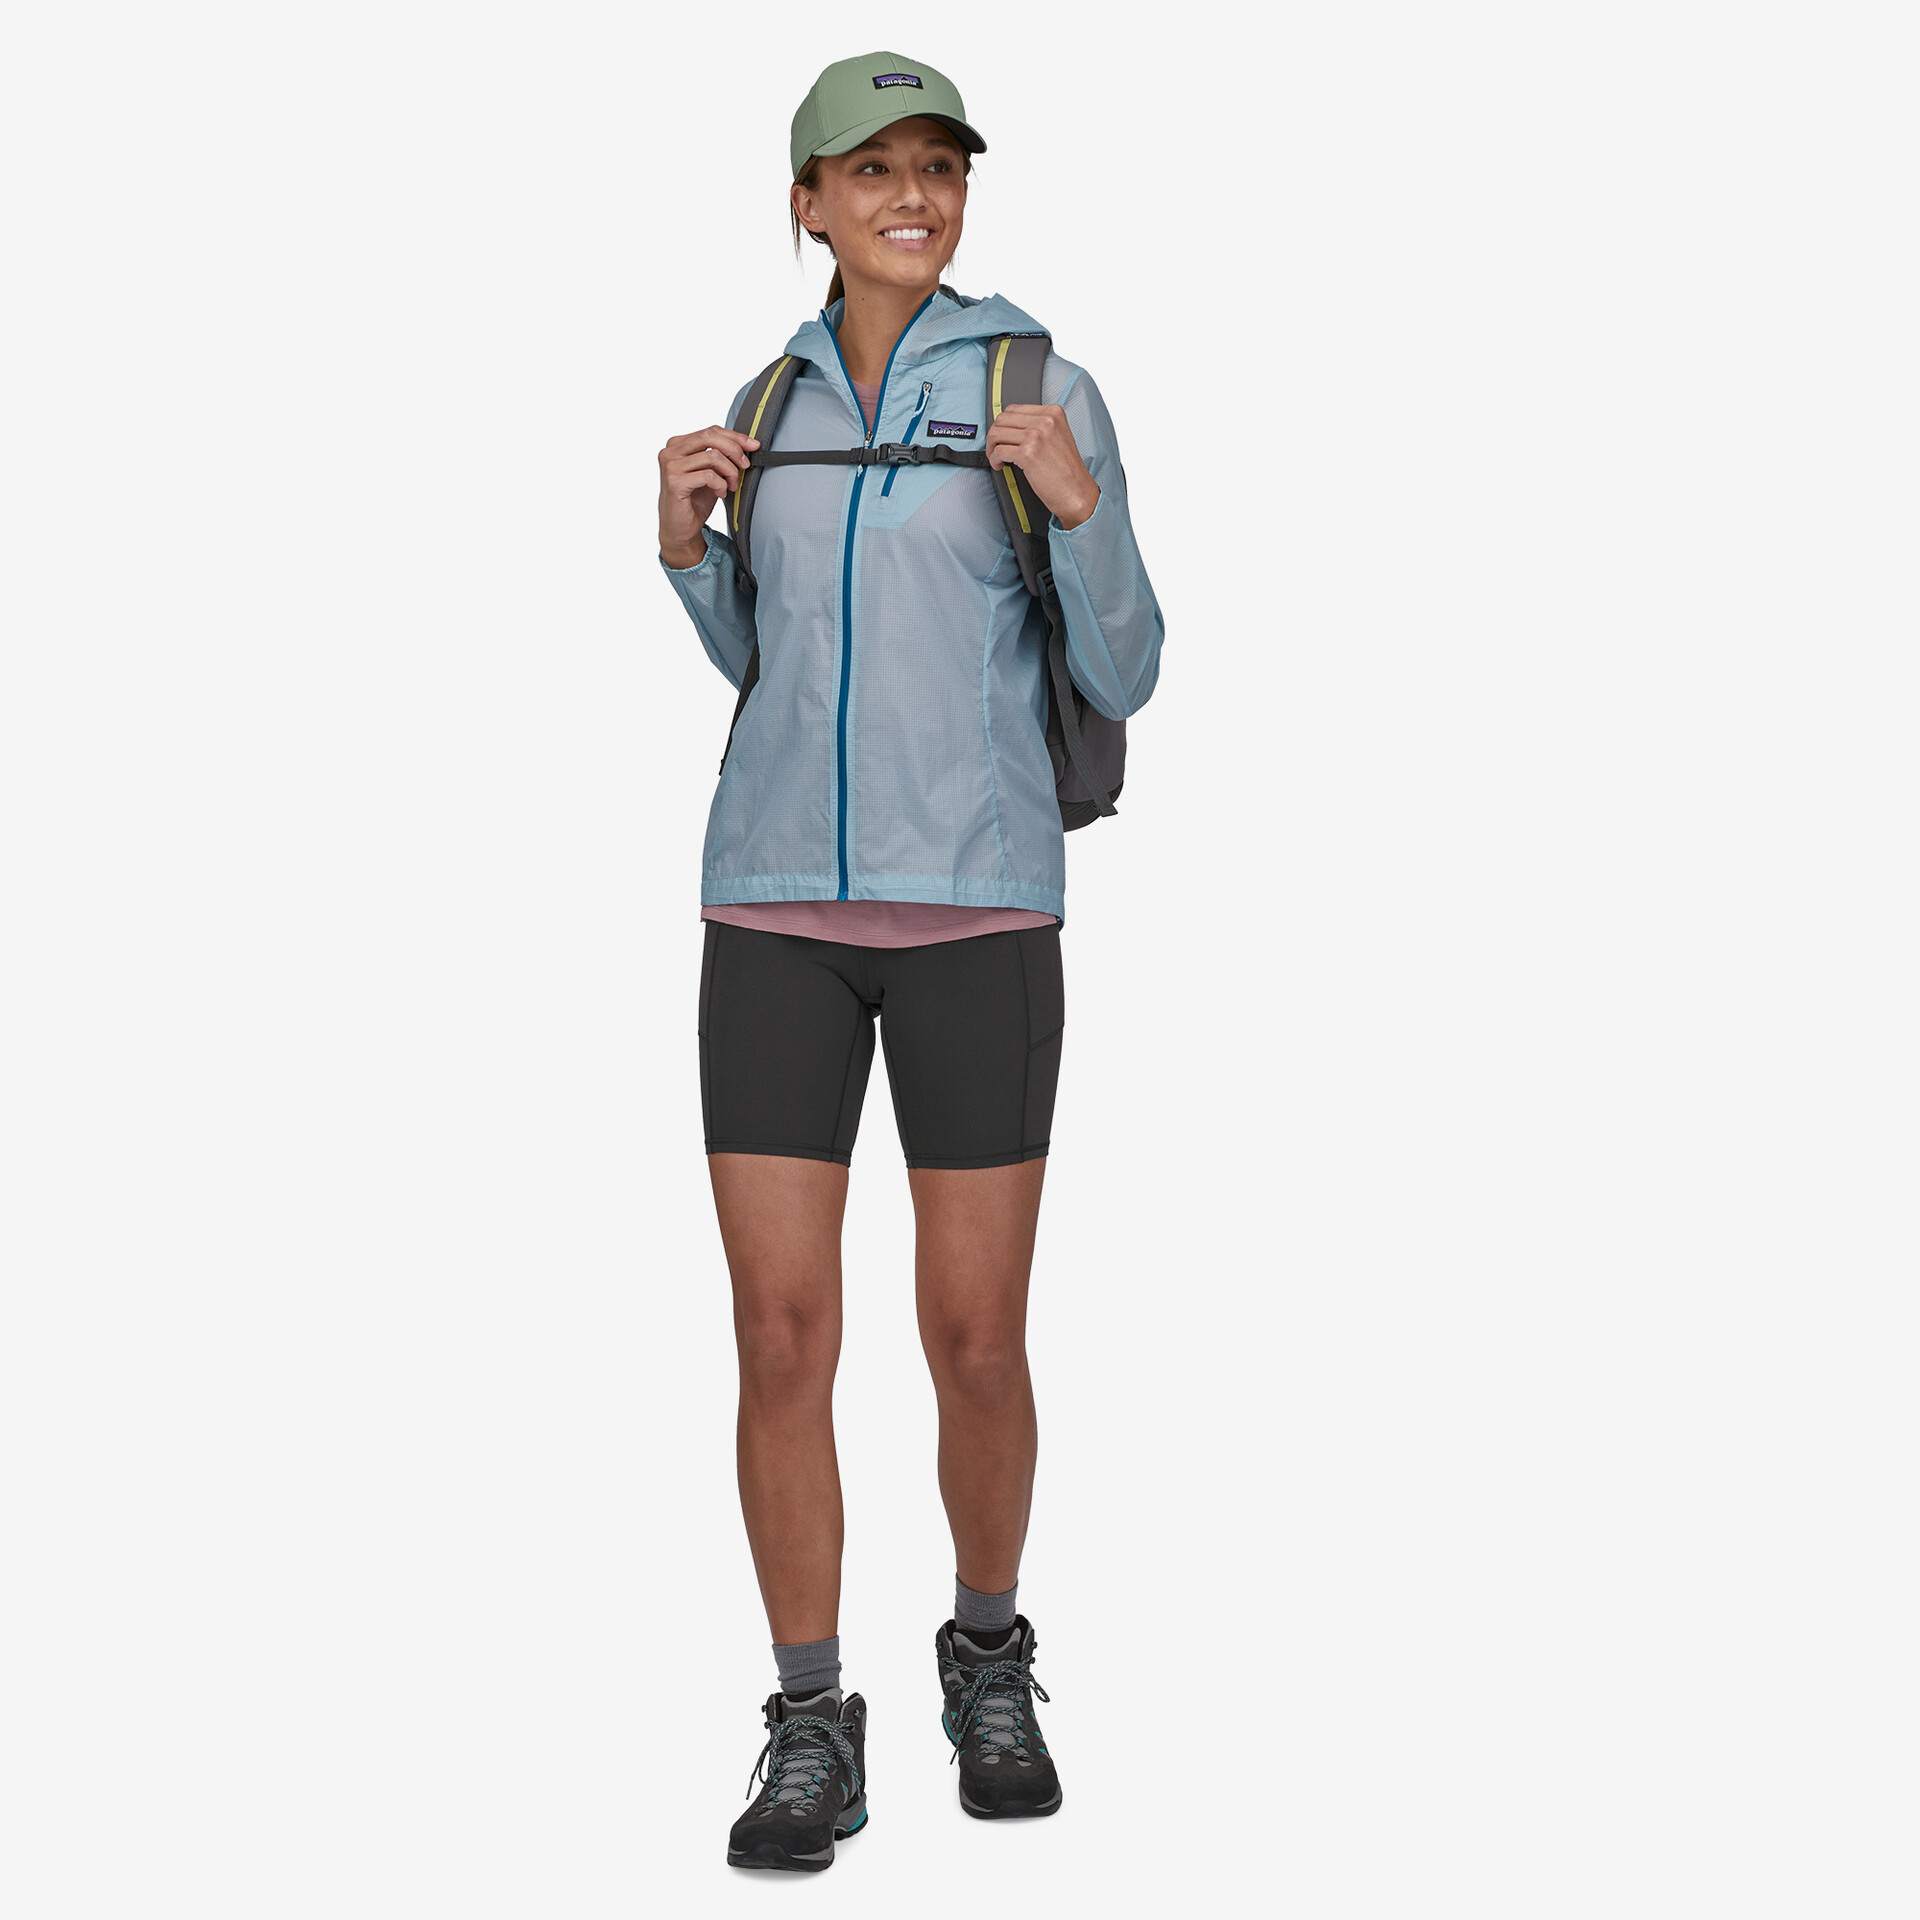 Person wearing athletic wear from Patagonia